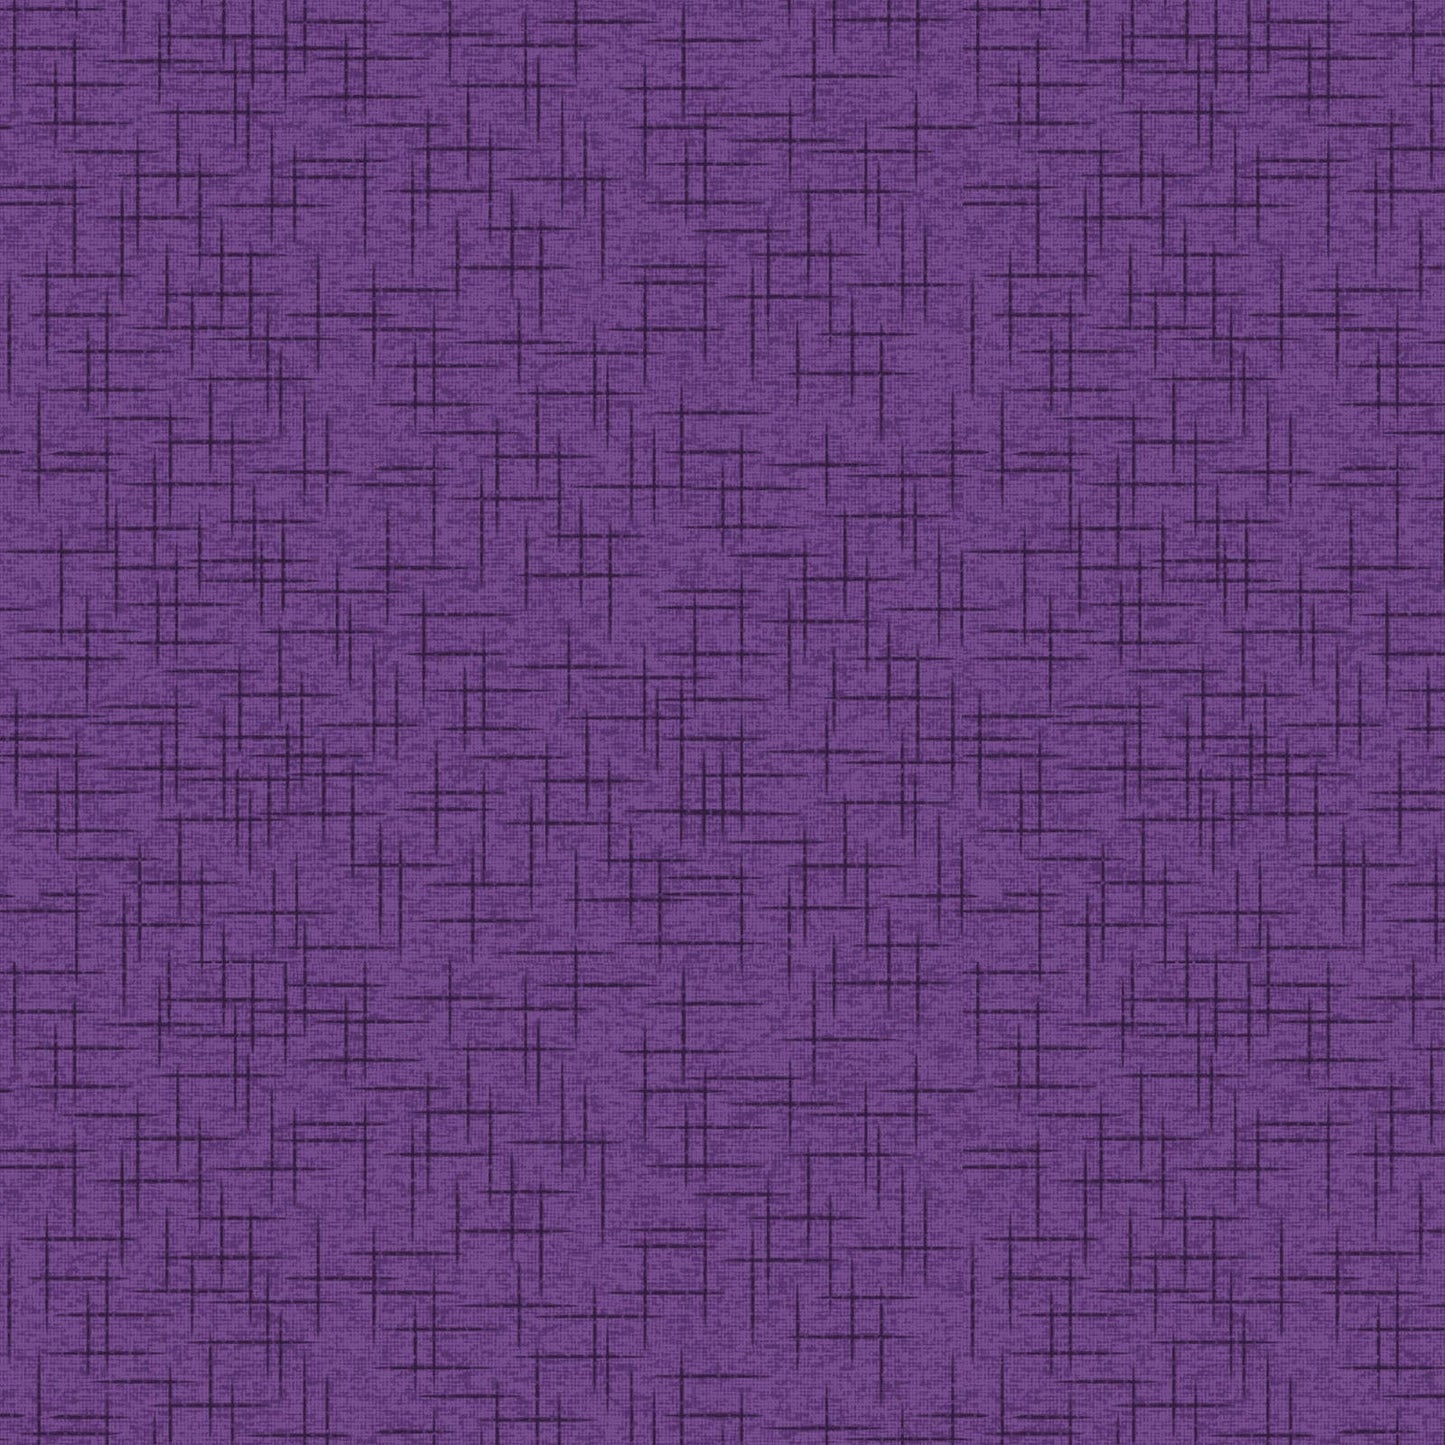 Linen texture in purple is part of the Kimberbell Basics line designed by Kim Christopherson for Maywood Studio. This fabric features purple tone on tone linen texture, making it the perfect blender to use in any quilting project, as a rich color for an applique or embroidery project, or as a border or binding to bring deep color.